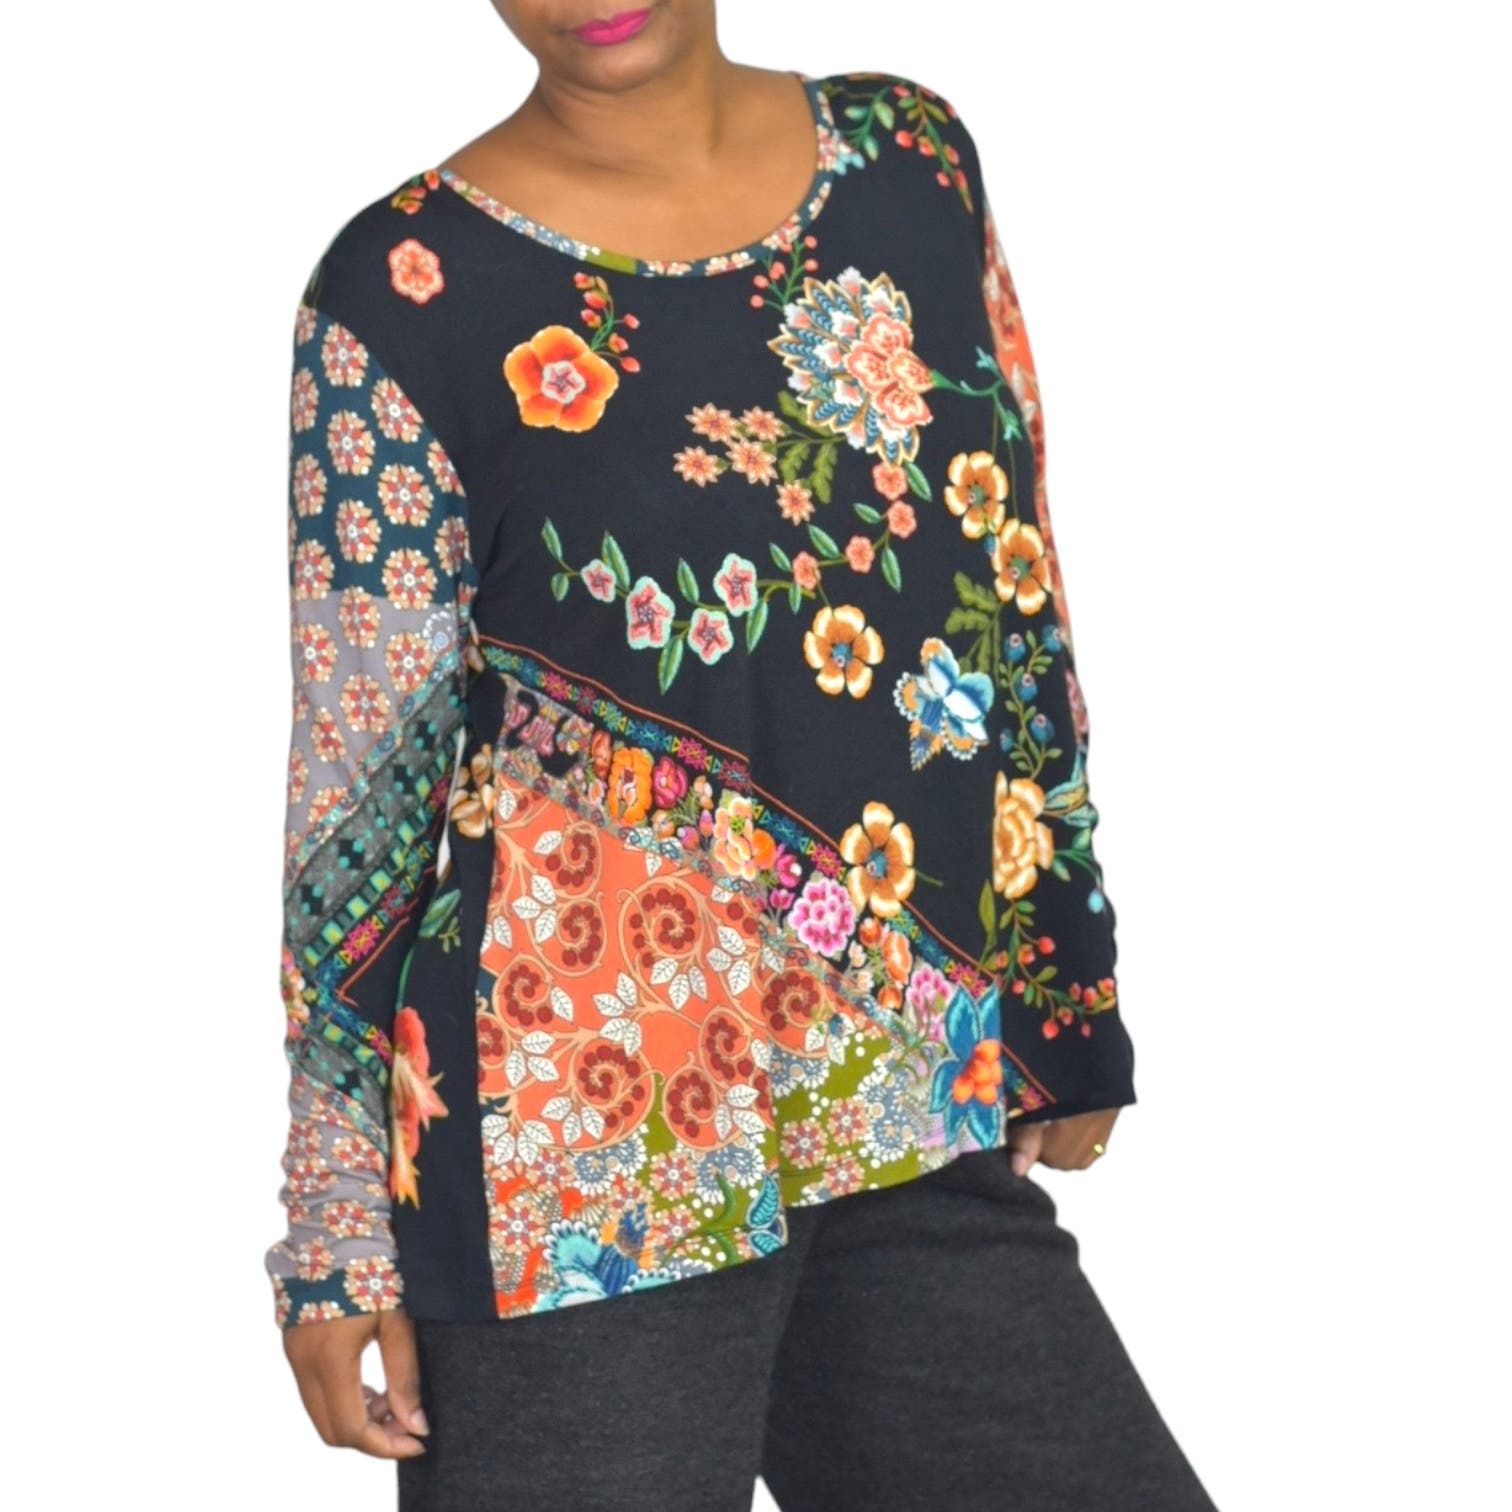 Johnny Was Ardell Favorite Top Floral Patchwork Long Sleeve T Shirt Tee JWLA Bamboo Size Medium